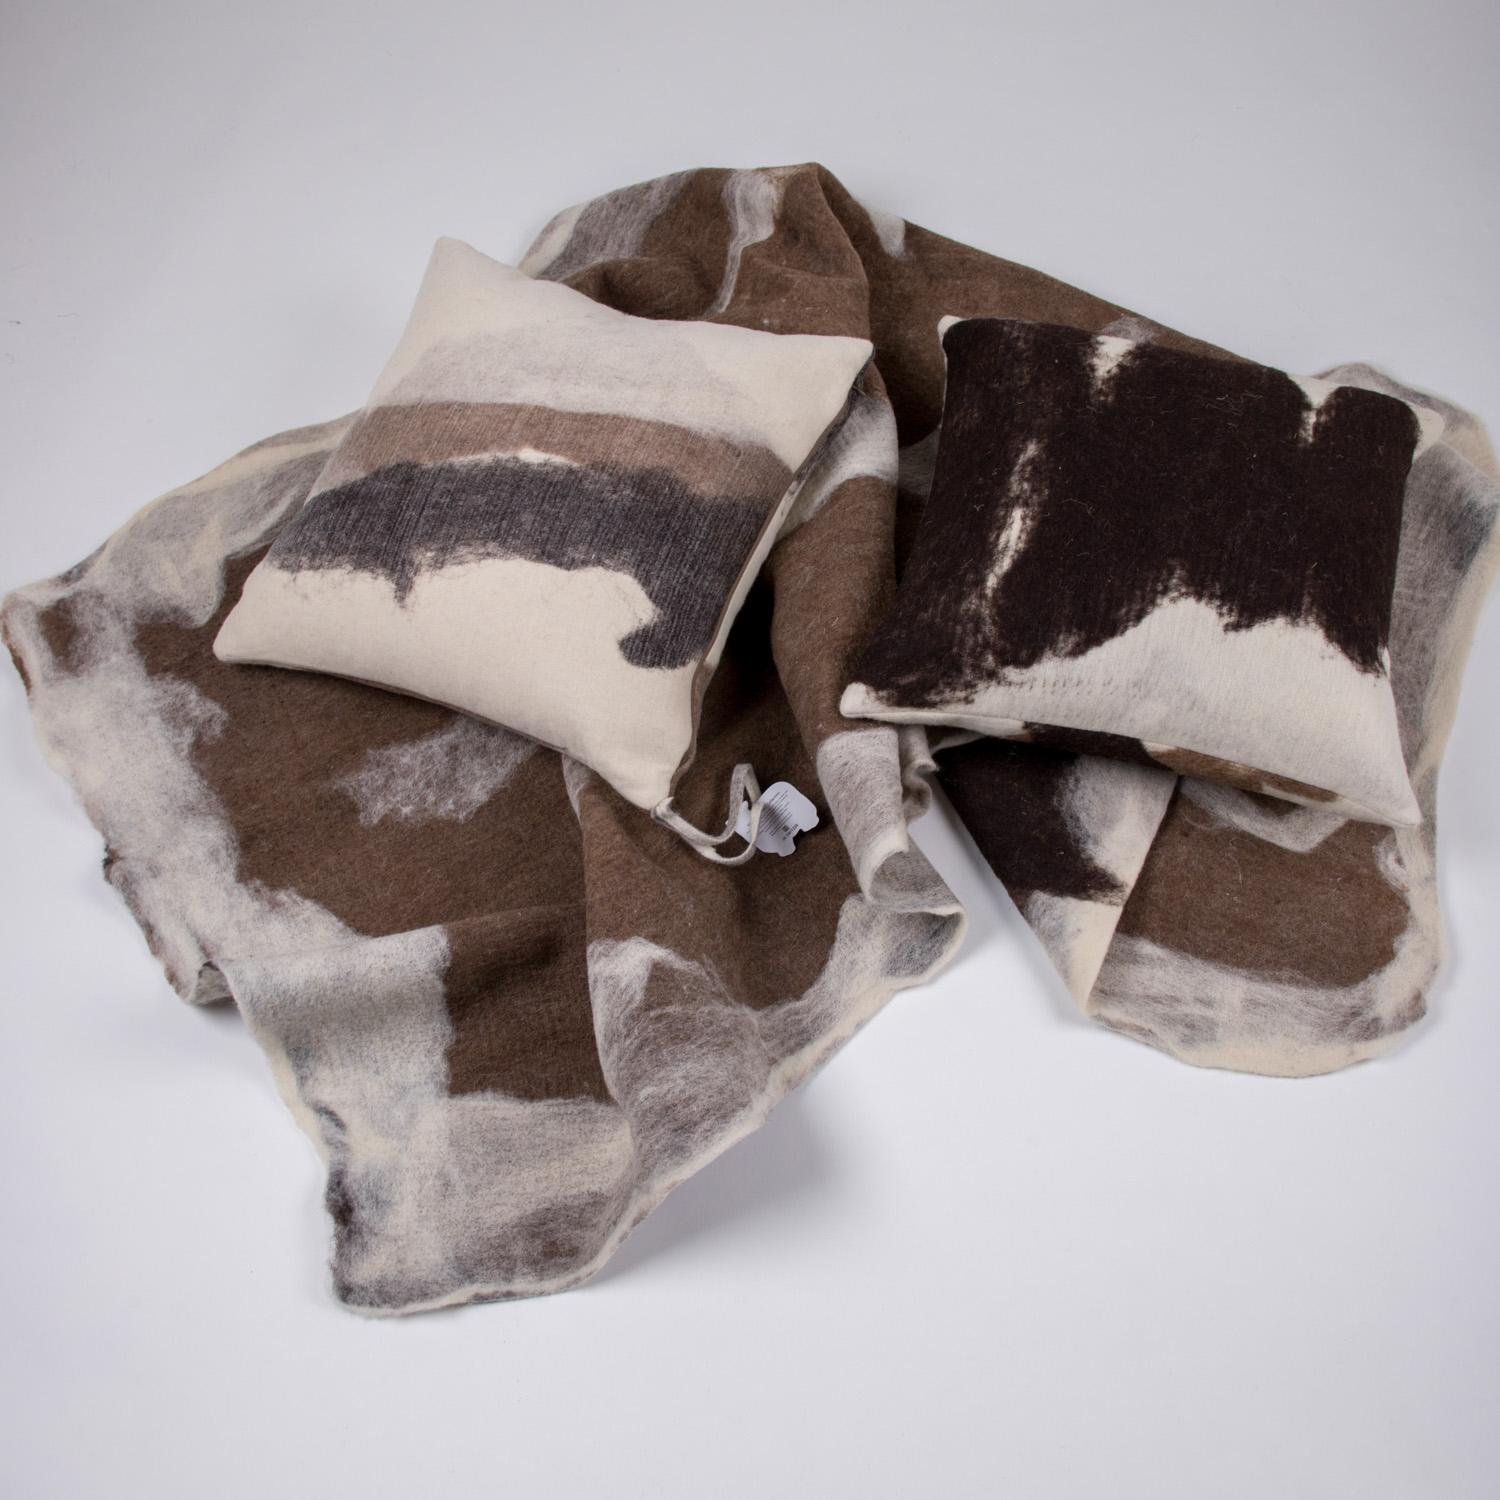 Hand-Milled Artisan Wool Pillows and Rustic Throw, Tahoe Collection In New Condition For Sale In Sebastopol, CA